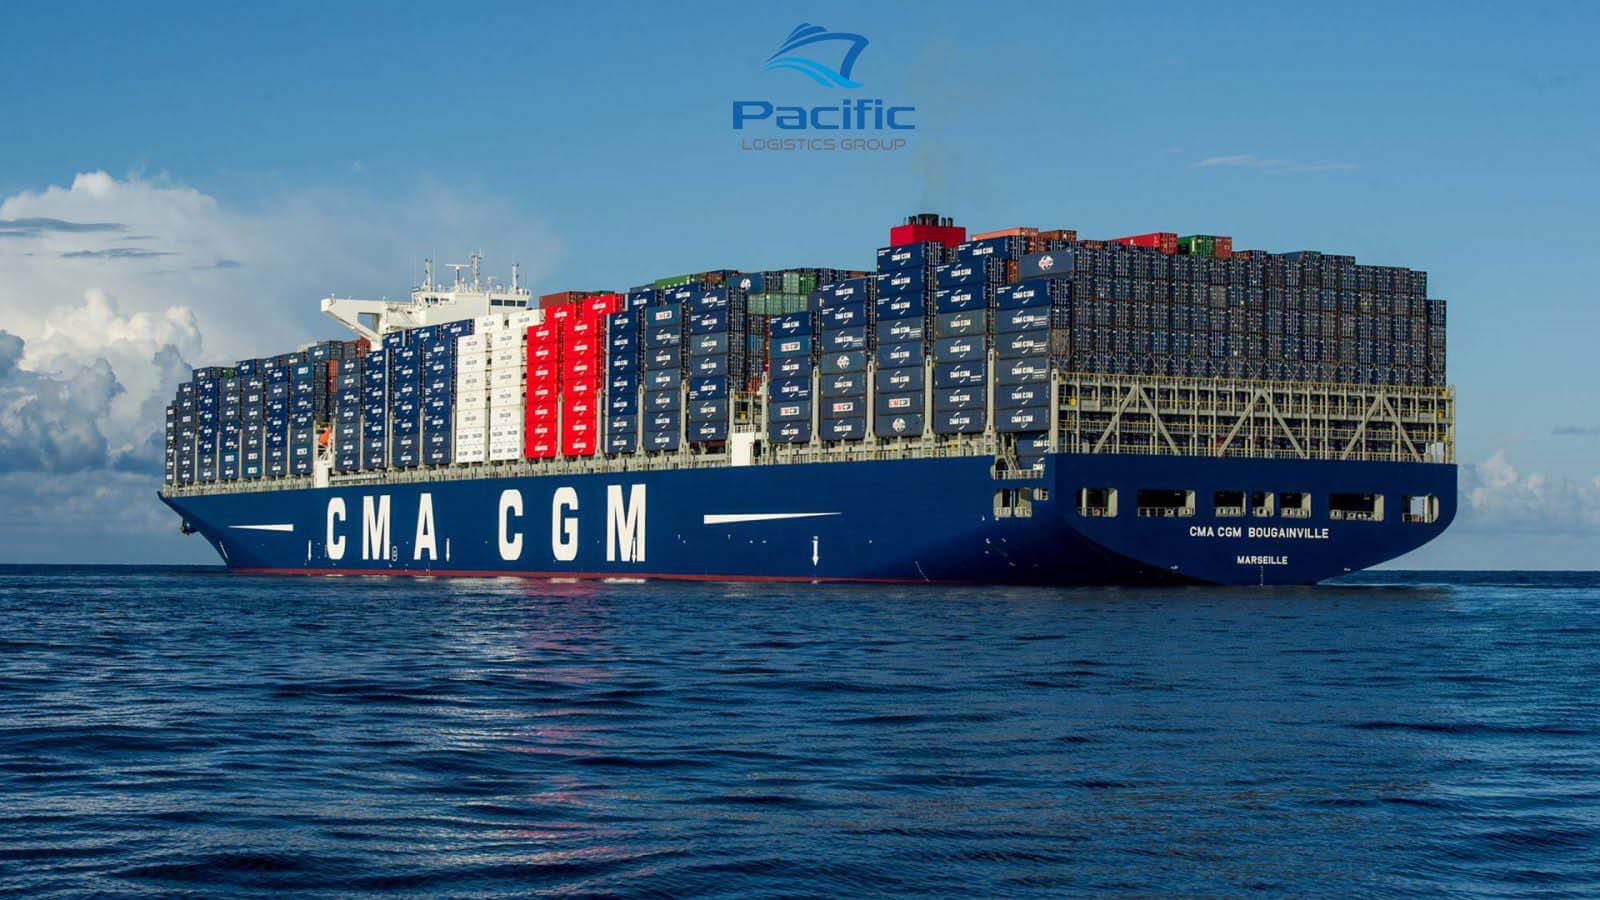 CMA CGM’s giant vessel losses containers in the Indian Ocean